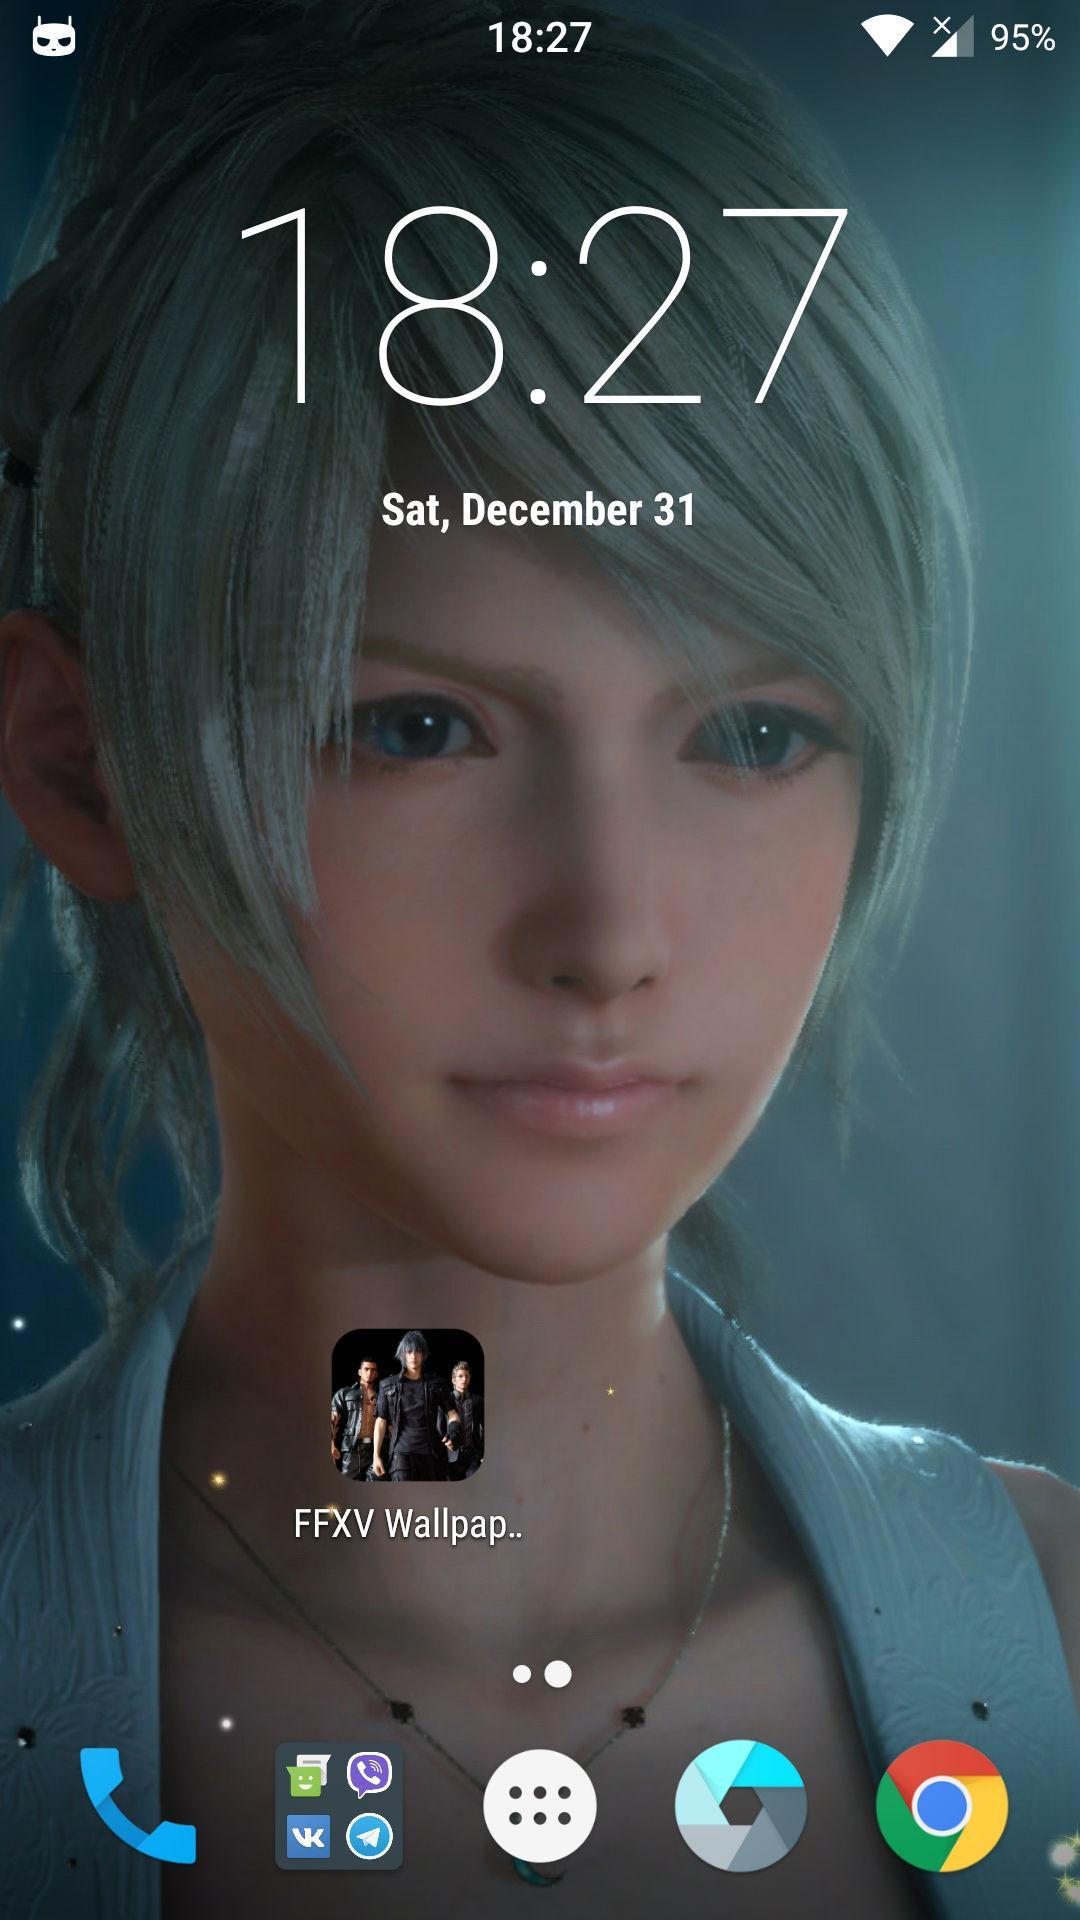 Ffxv Wallpaper Hd 15 For Android Apk Download